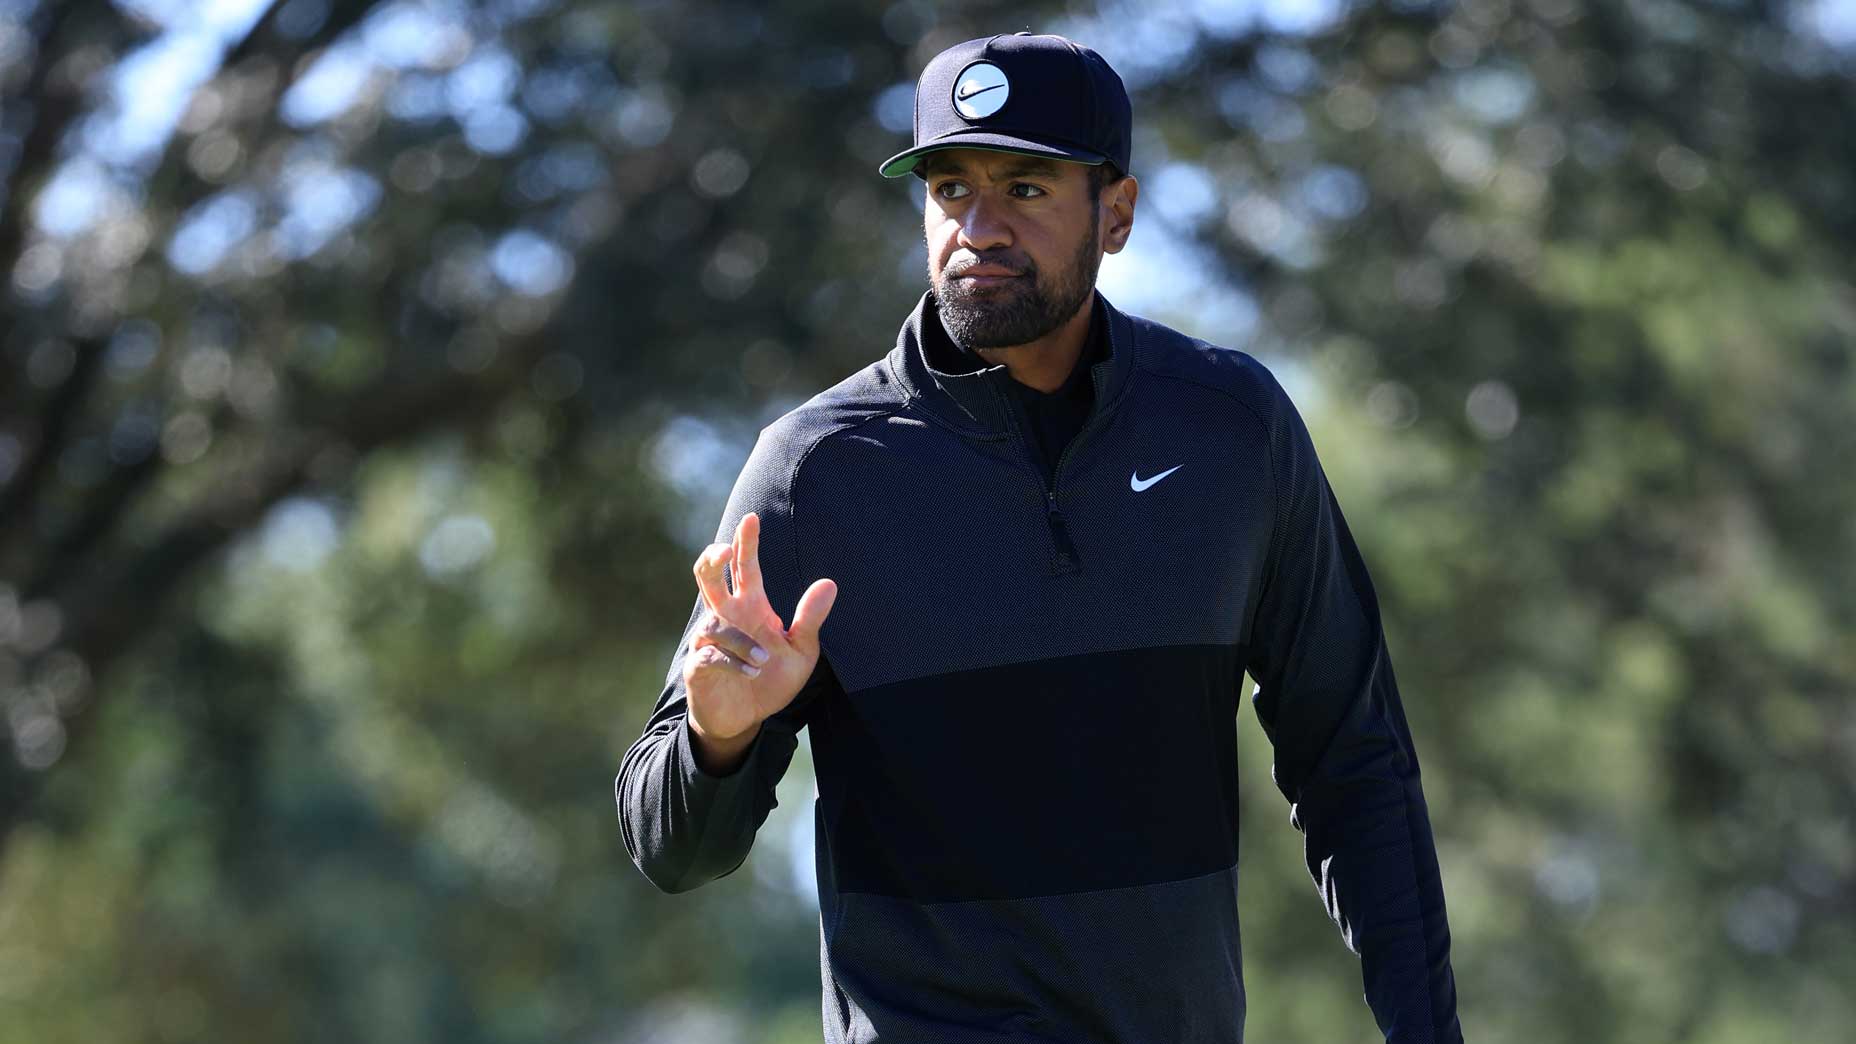 Tony Finau dominating once again, leads by four in Houston